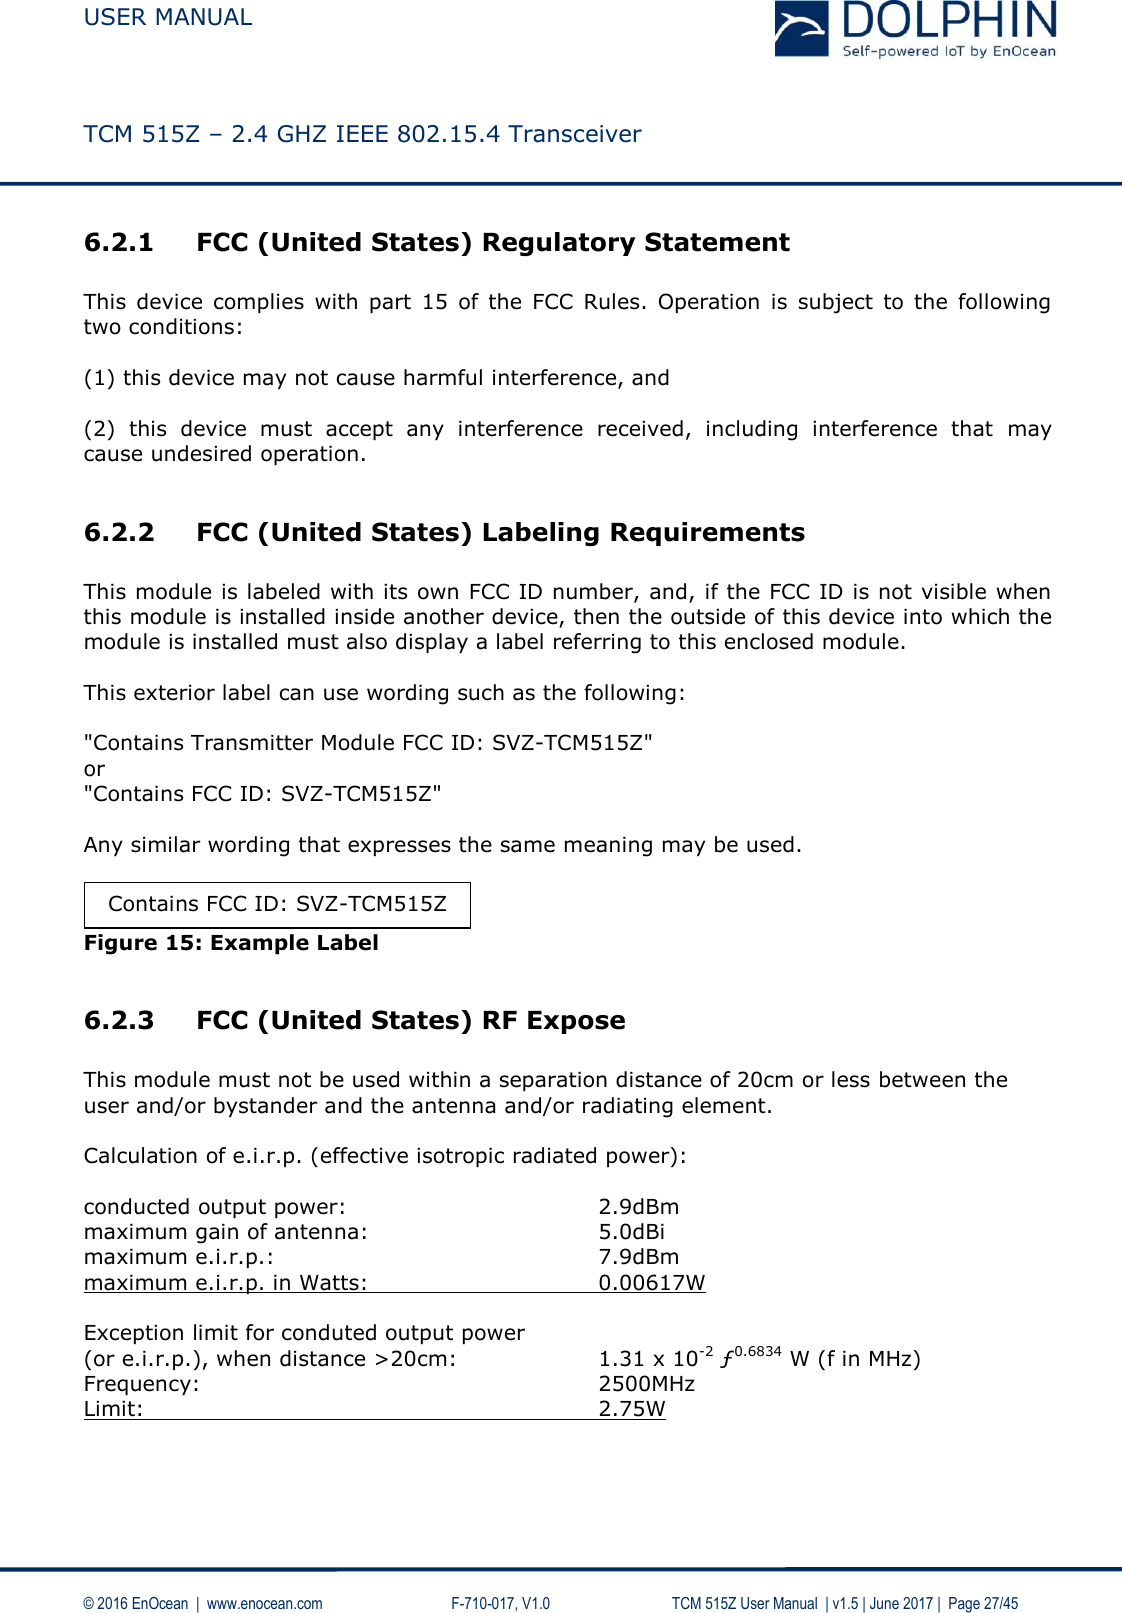  USER MANUAL    TCM 515Z – 2.4 GHZ IEEE 802.15.4 Transceiver   © 2016 EnOcean  |  www.enocean.com     F-710-017, V1.0        TCM 515Z User Manual  | v1.5 | June 2017 |  Page 27/45 6.2.1 FCC (United States) Regulatory Statement  This  device complies  with  part  15  of  the  FCC  Rules.  Operation  is  subject  to  the following two conditions:   (1) this device may not cause harmful interference, and   (2)  this  device  must  accept  any  interference  received,  including  interference  that  may cause undesired operation.  6.2.2 FCC (United States) Labeling Requirements  This module is labeled with its own FCC ID number, and, if the FCC ID is not visible when this module is installed inside another device, then the outside of this device into which the module is installed must also display a label referring to this enclosed module.  This exterior label can use wording such as the following:  &quot;Contains Transmitter Module FCC ID: SVZ-TCM515Z&quot; or &quot;Contains FCC ID: SVZ-TCM515Z&quot;  Any similar wording that expresses the same meaning may be used.   Figure 15: Example Label  6.2.3 FCC (United States) RF Expose  This module must not be used within a separation distance of 20cm or less between the user and/or bystander and the antenna and/or radiating element.  Calculation of e.i.r.p. (effective isotropic radiated power):  conducted output power:        2.9dBm maximum gain of antenna:       5.0dBi maximum e.i.r.p.:          7.9dBm maximum e.i.r.p. in Watts:       0.00617W  Exception limit for conduted output power (or e.i.r.p.), when distance &gt;20cm:    1.31 x 10-2 ƒ0.6834 W (f in MHz) Frequency:            2500MHz Limit:              2.75W   Contains FCC ID: SVZ-TCM515Z 